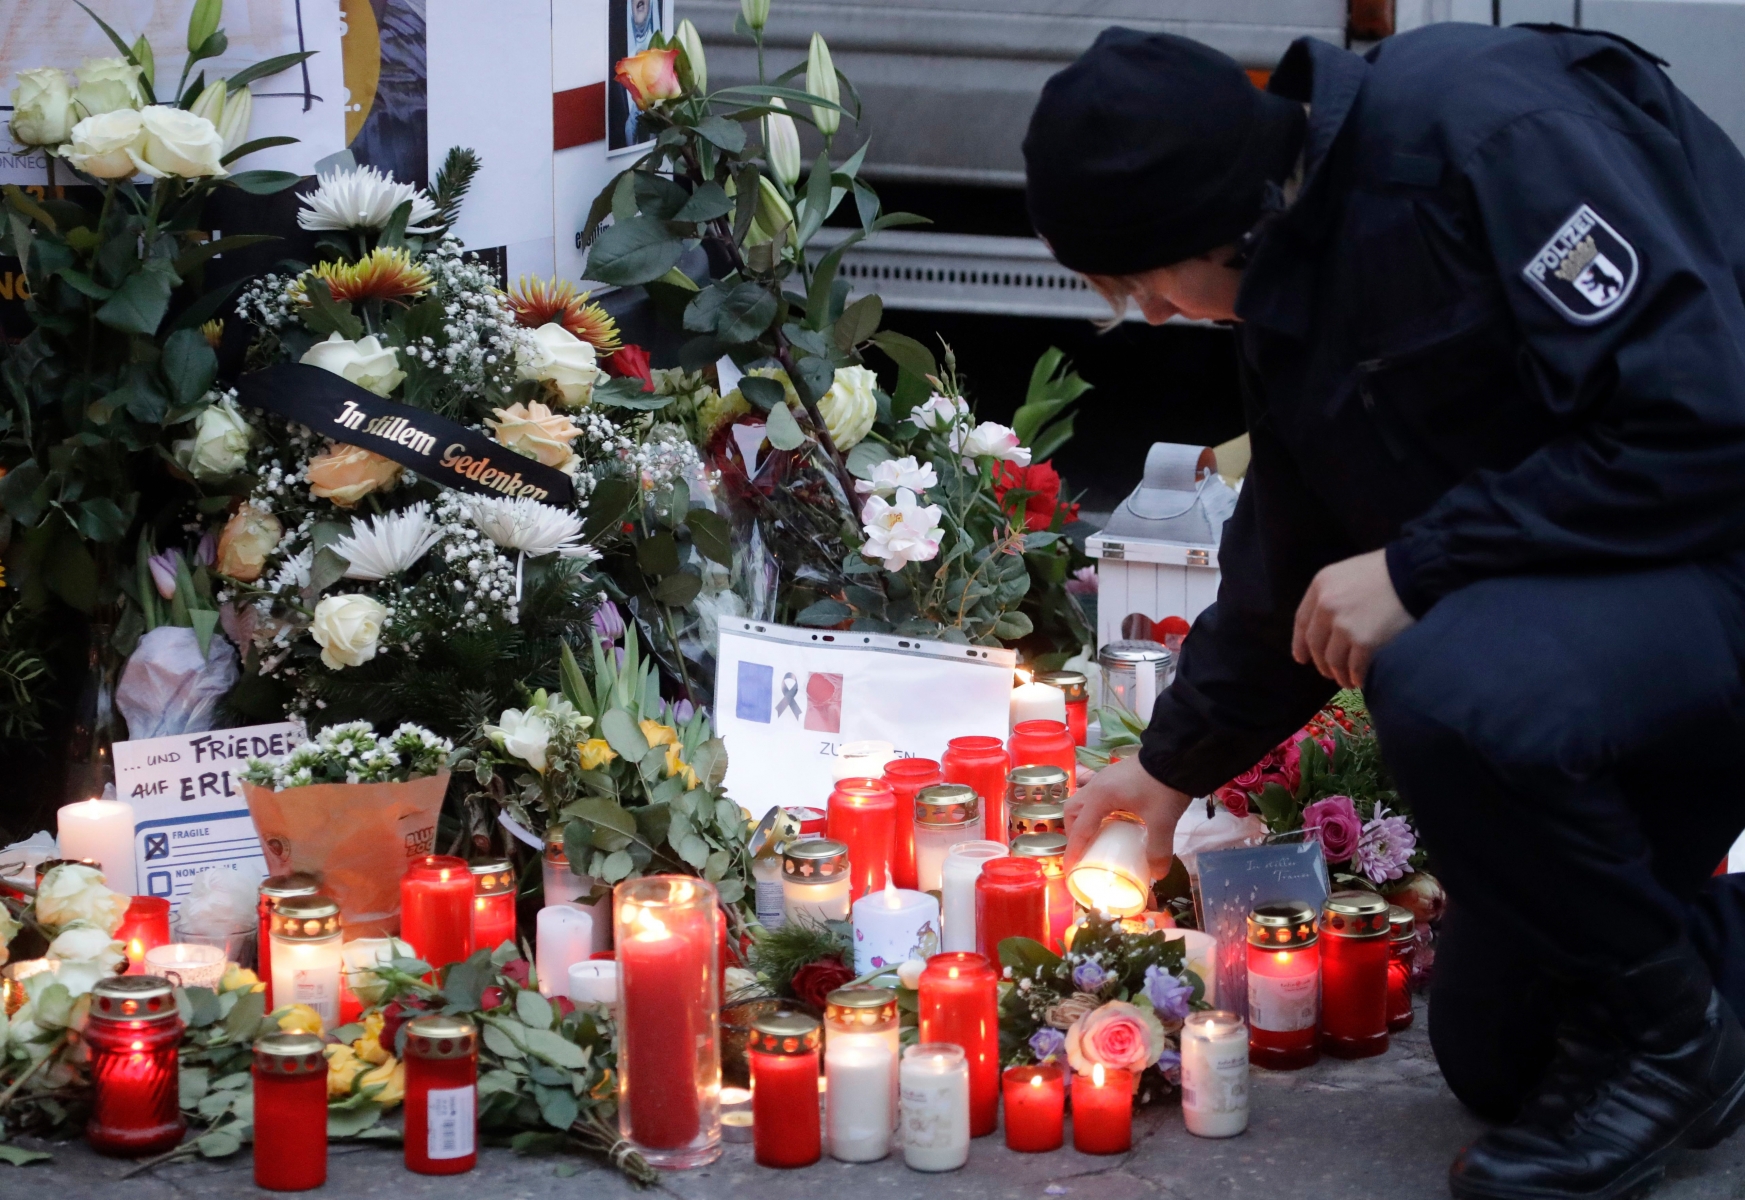 A police officer lights a candle in Berlin, Germany, Tuesday, Dec. 20, 2016, the day after a truck ran into a crowded Christmas market nearby and killed several people. (AP Photo/Matthias Schrader) Germany Christmas Market